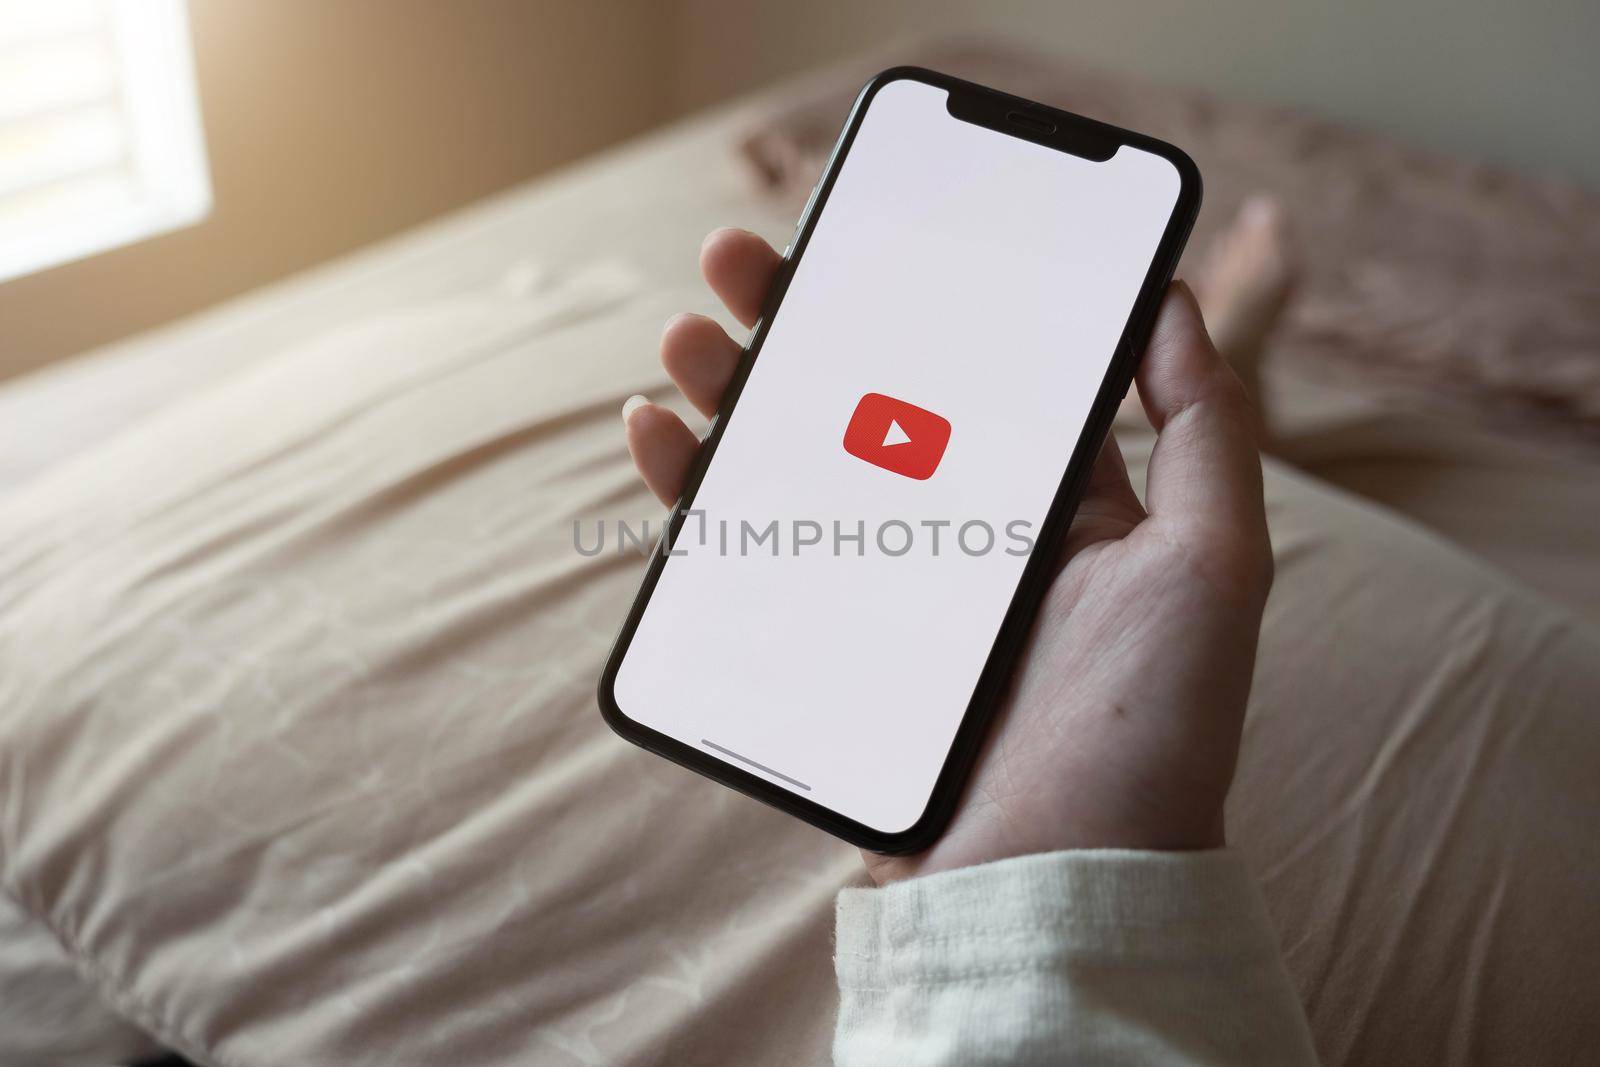 CHIANG MAI, THAILAND - JUNE 7, 2020: Latest generation iPhone X with YouTube logo on the screen.